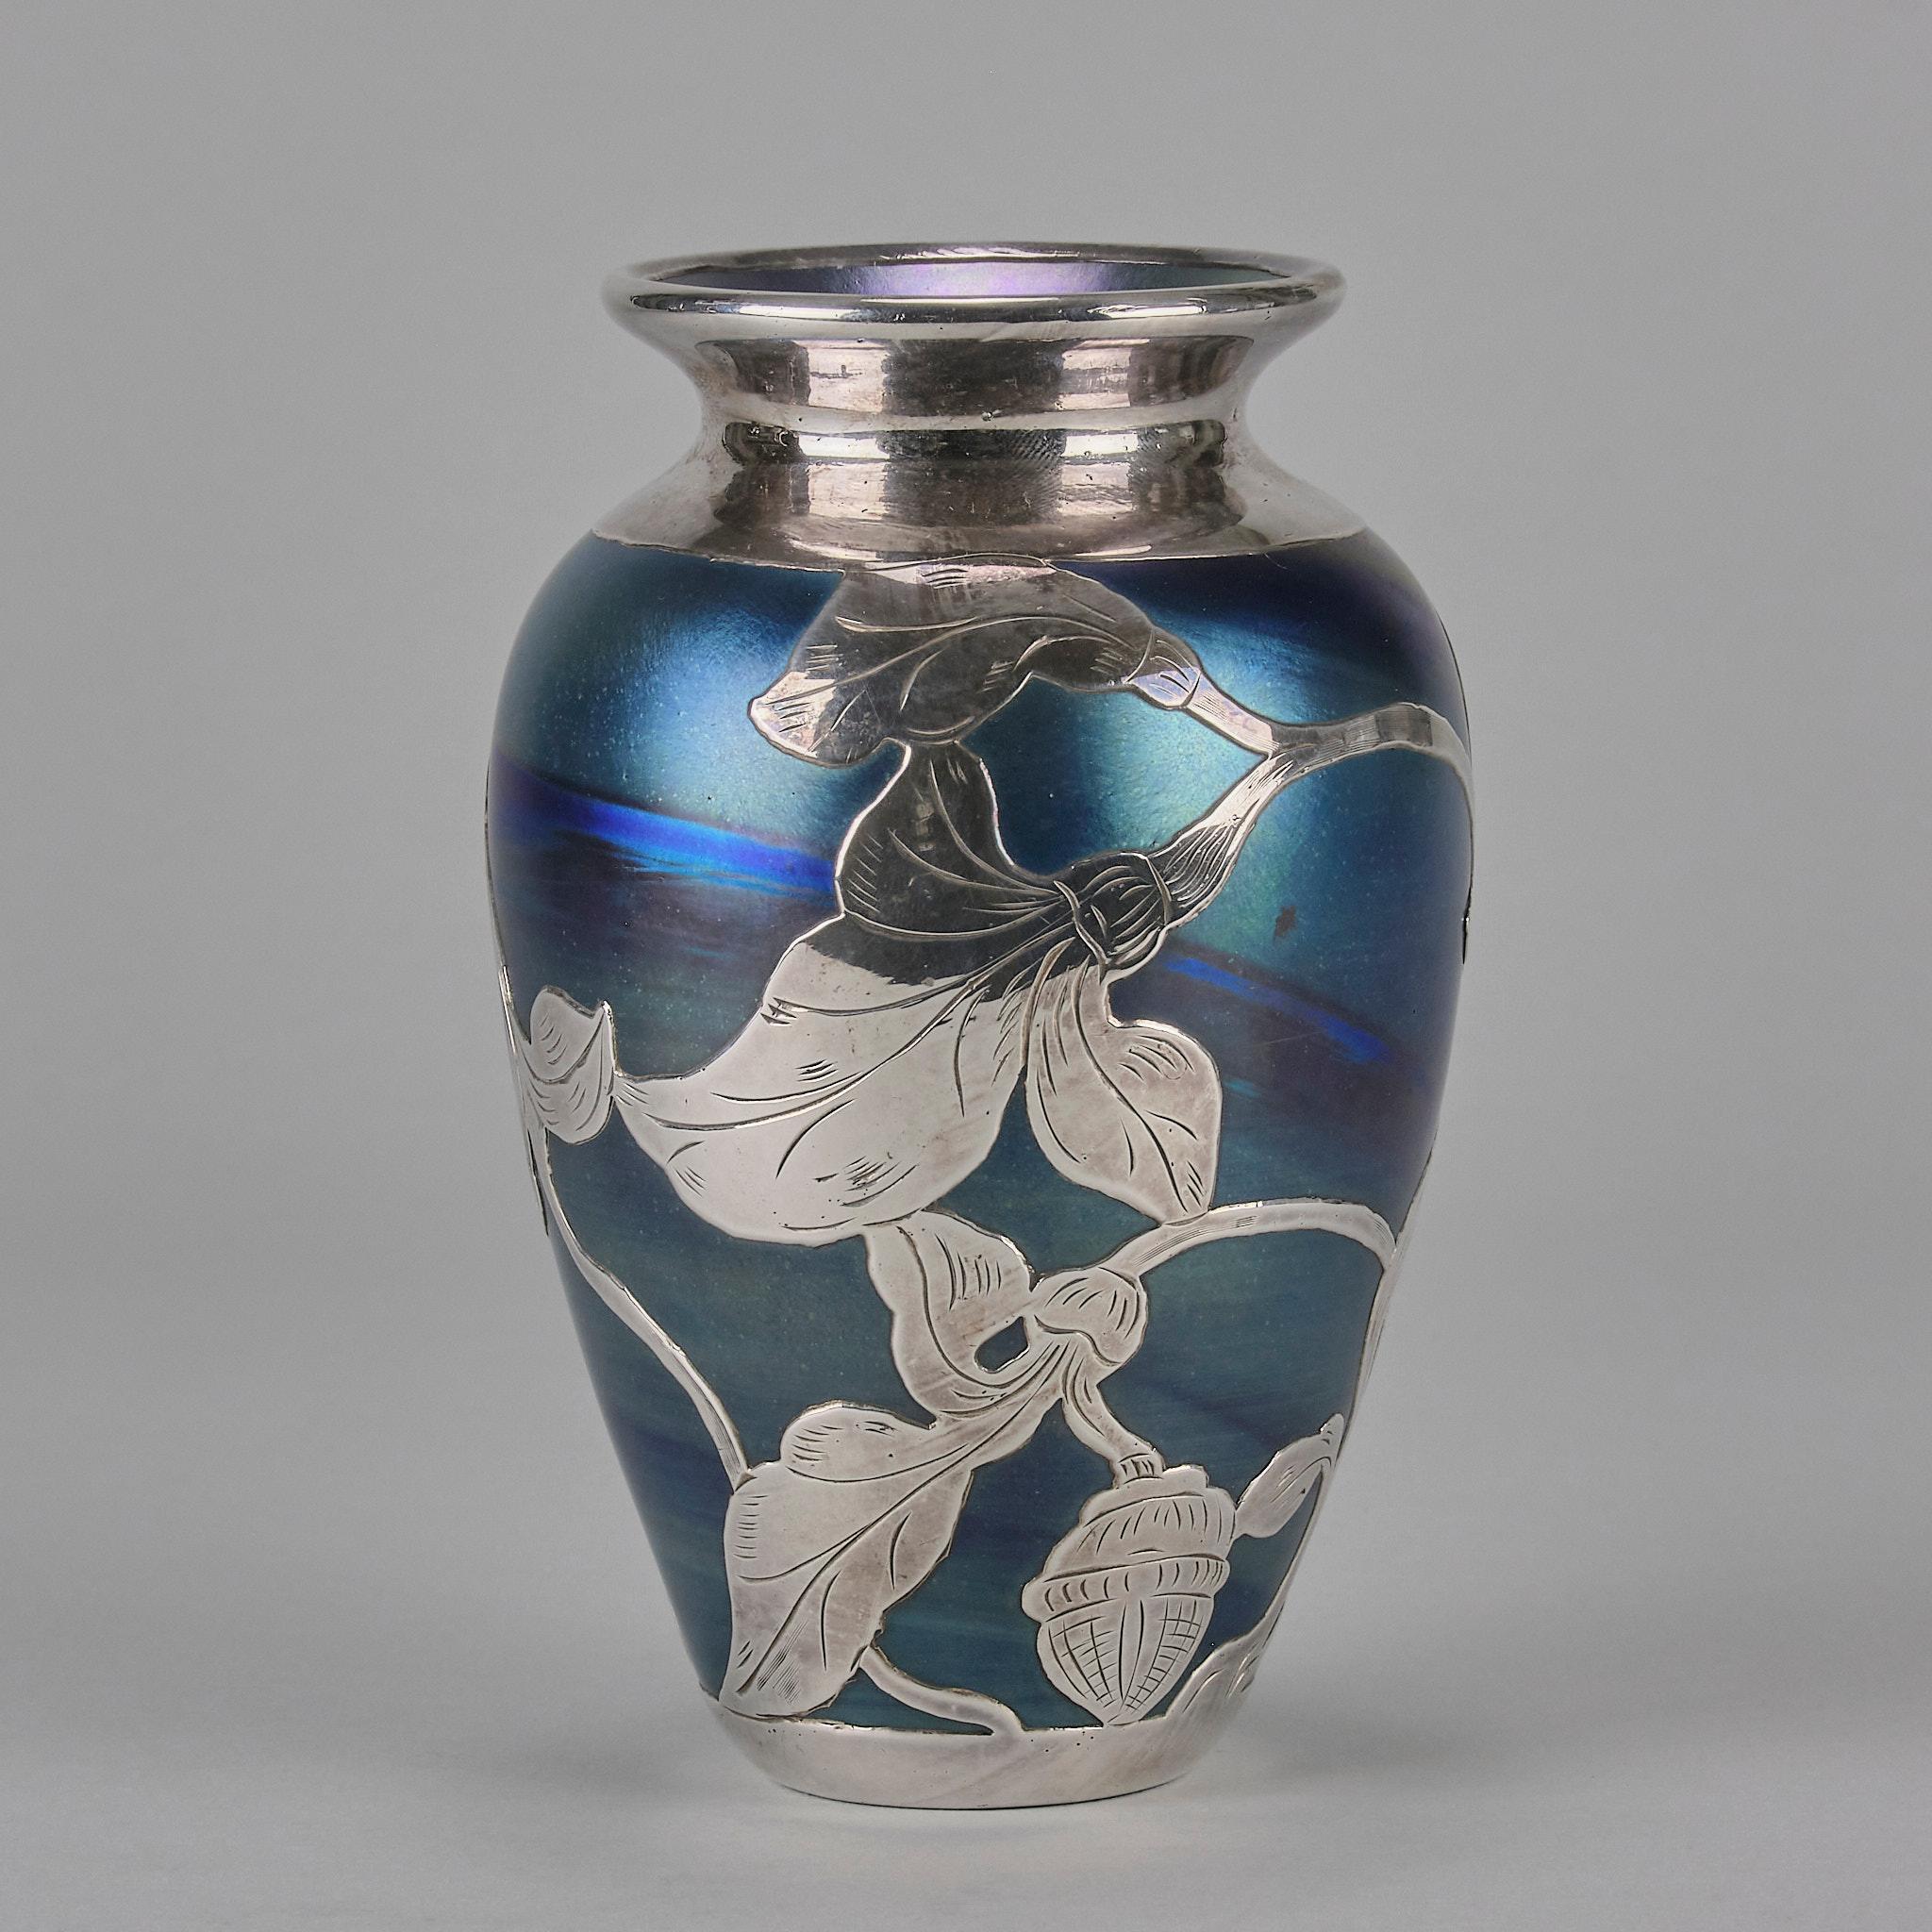 An excellent early 20th Century Austrian Art Nouveau iridescent petrol blue glass vase, decorated with an applied silver organic floral pattern around the full circumference of the body.
ADDITIONAL INFORMATION

Height: 15 cm 

Diameter: 10 cm